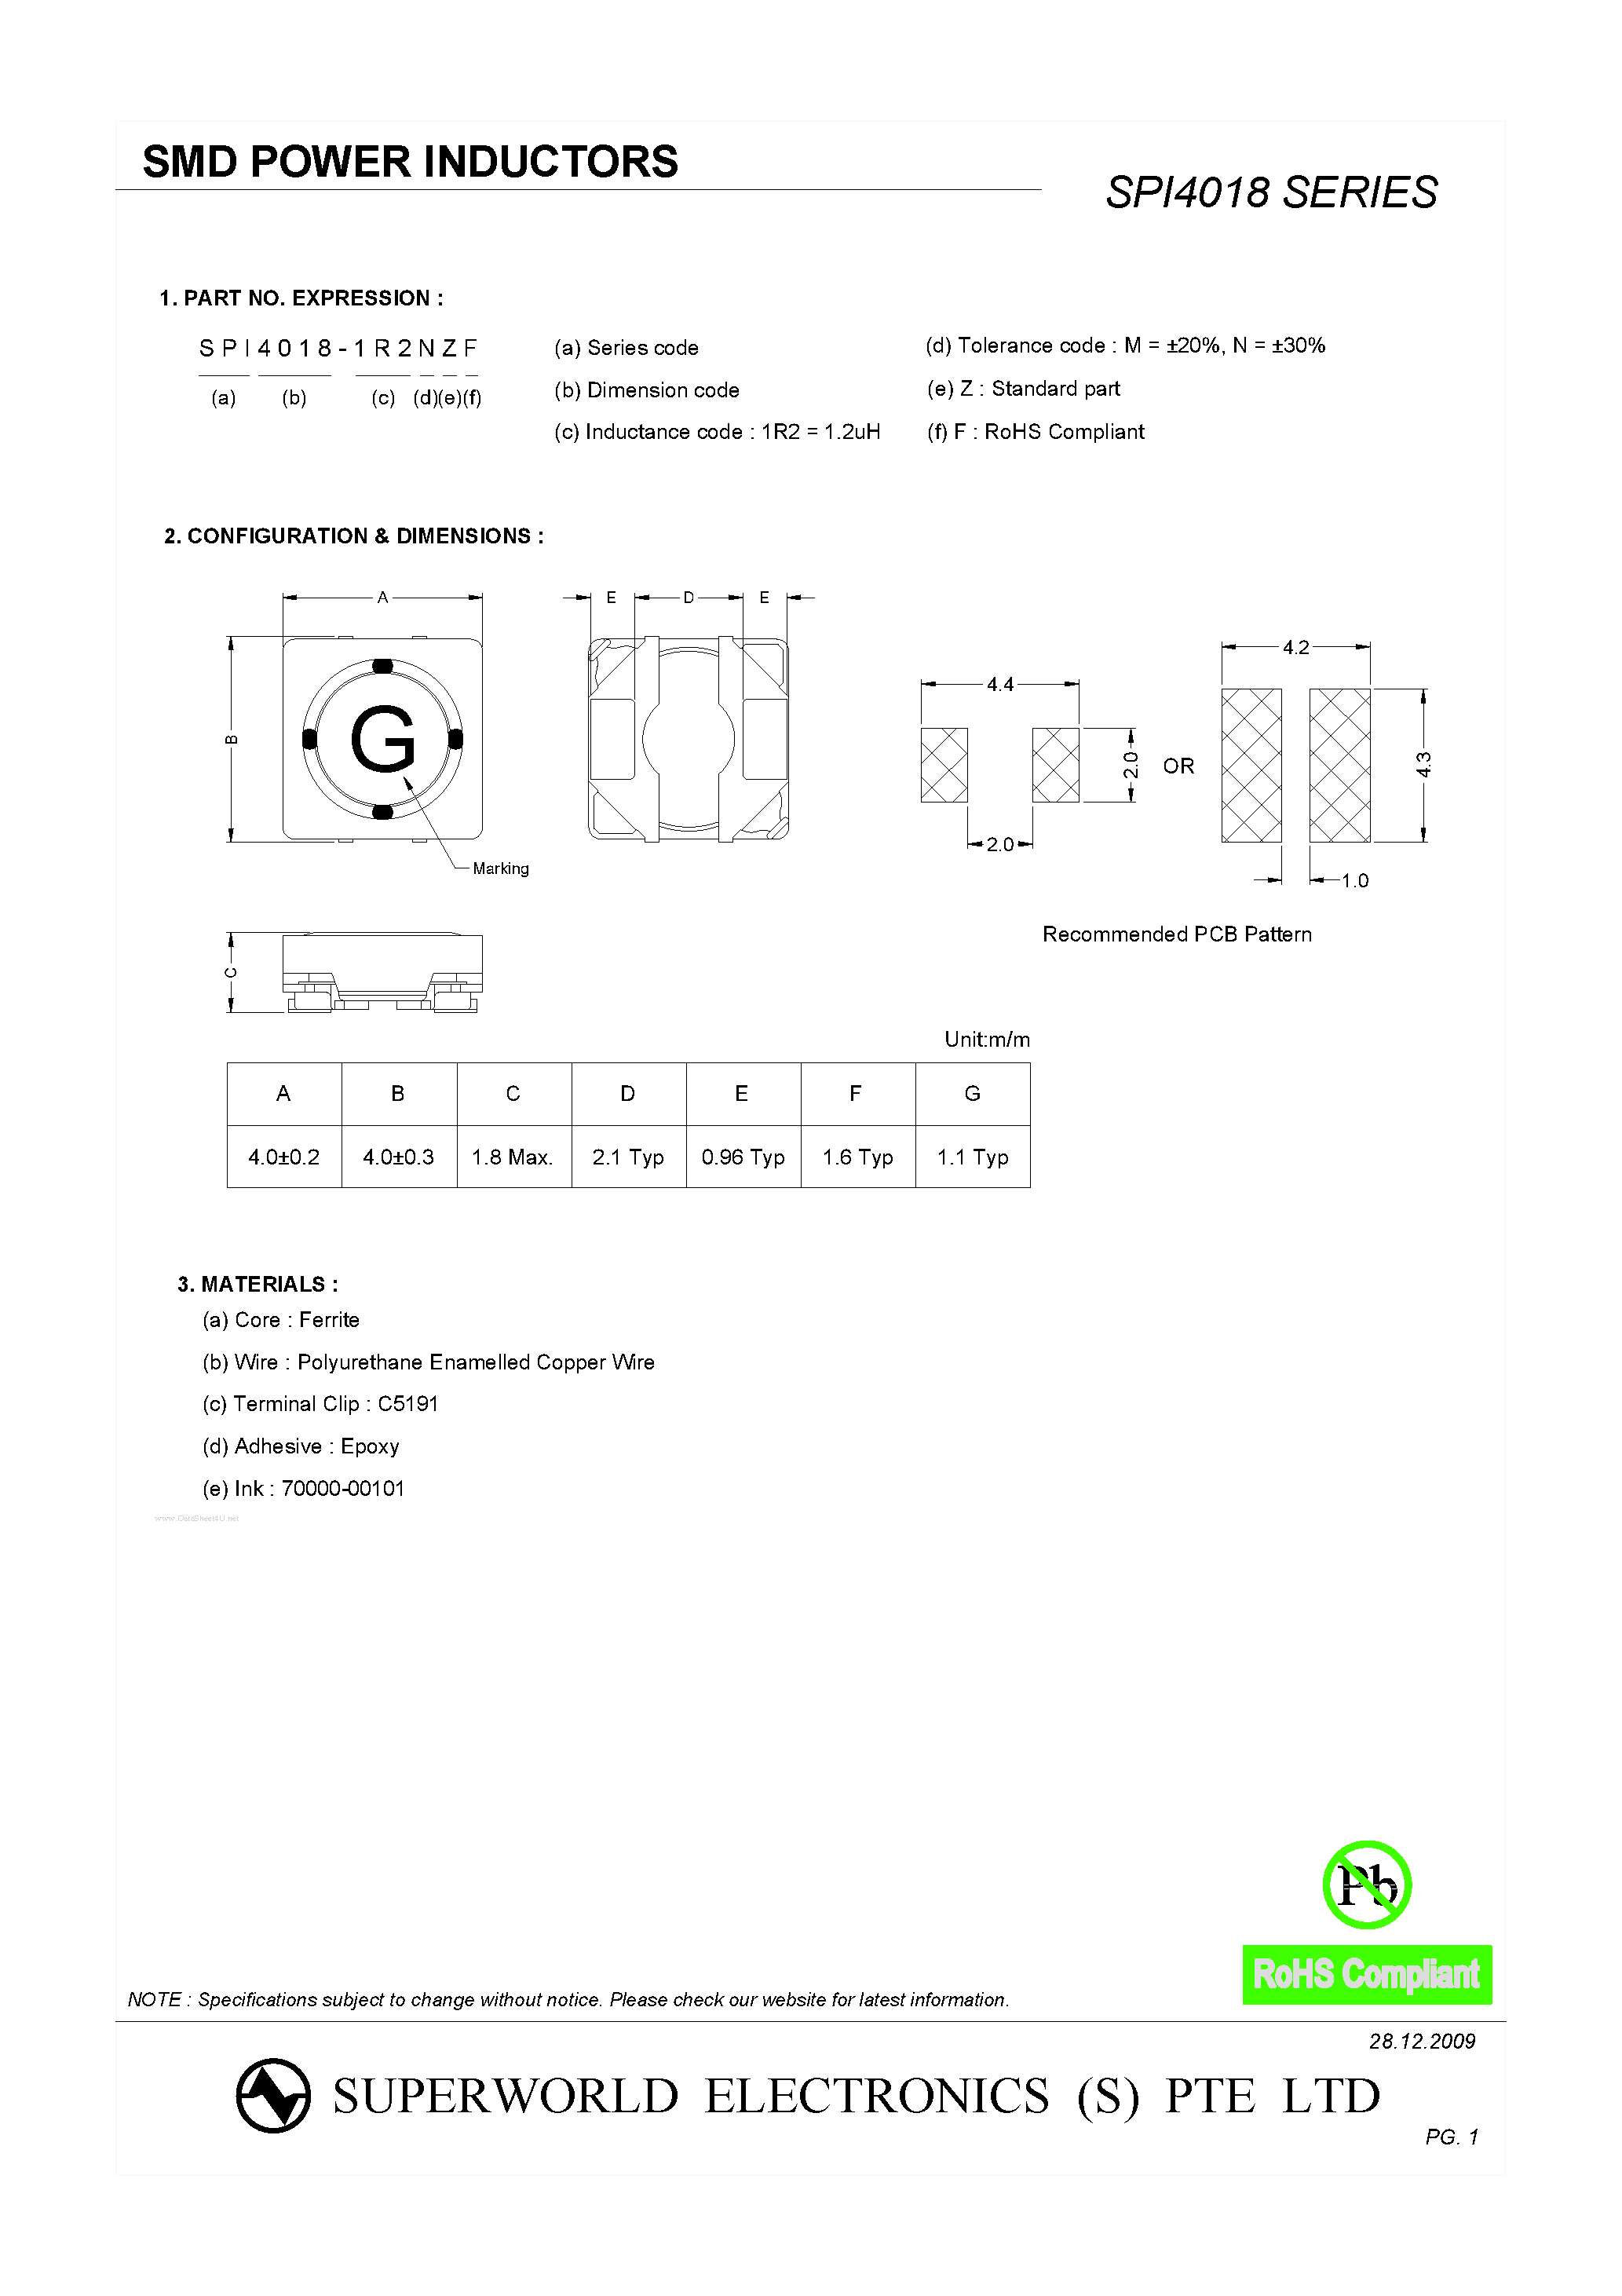 Datasheet SPI4018 - SMD POWER INDUCTORS page 1